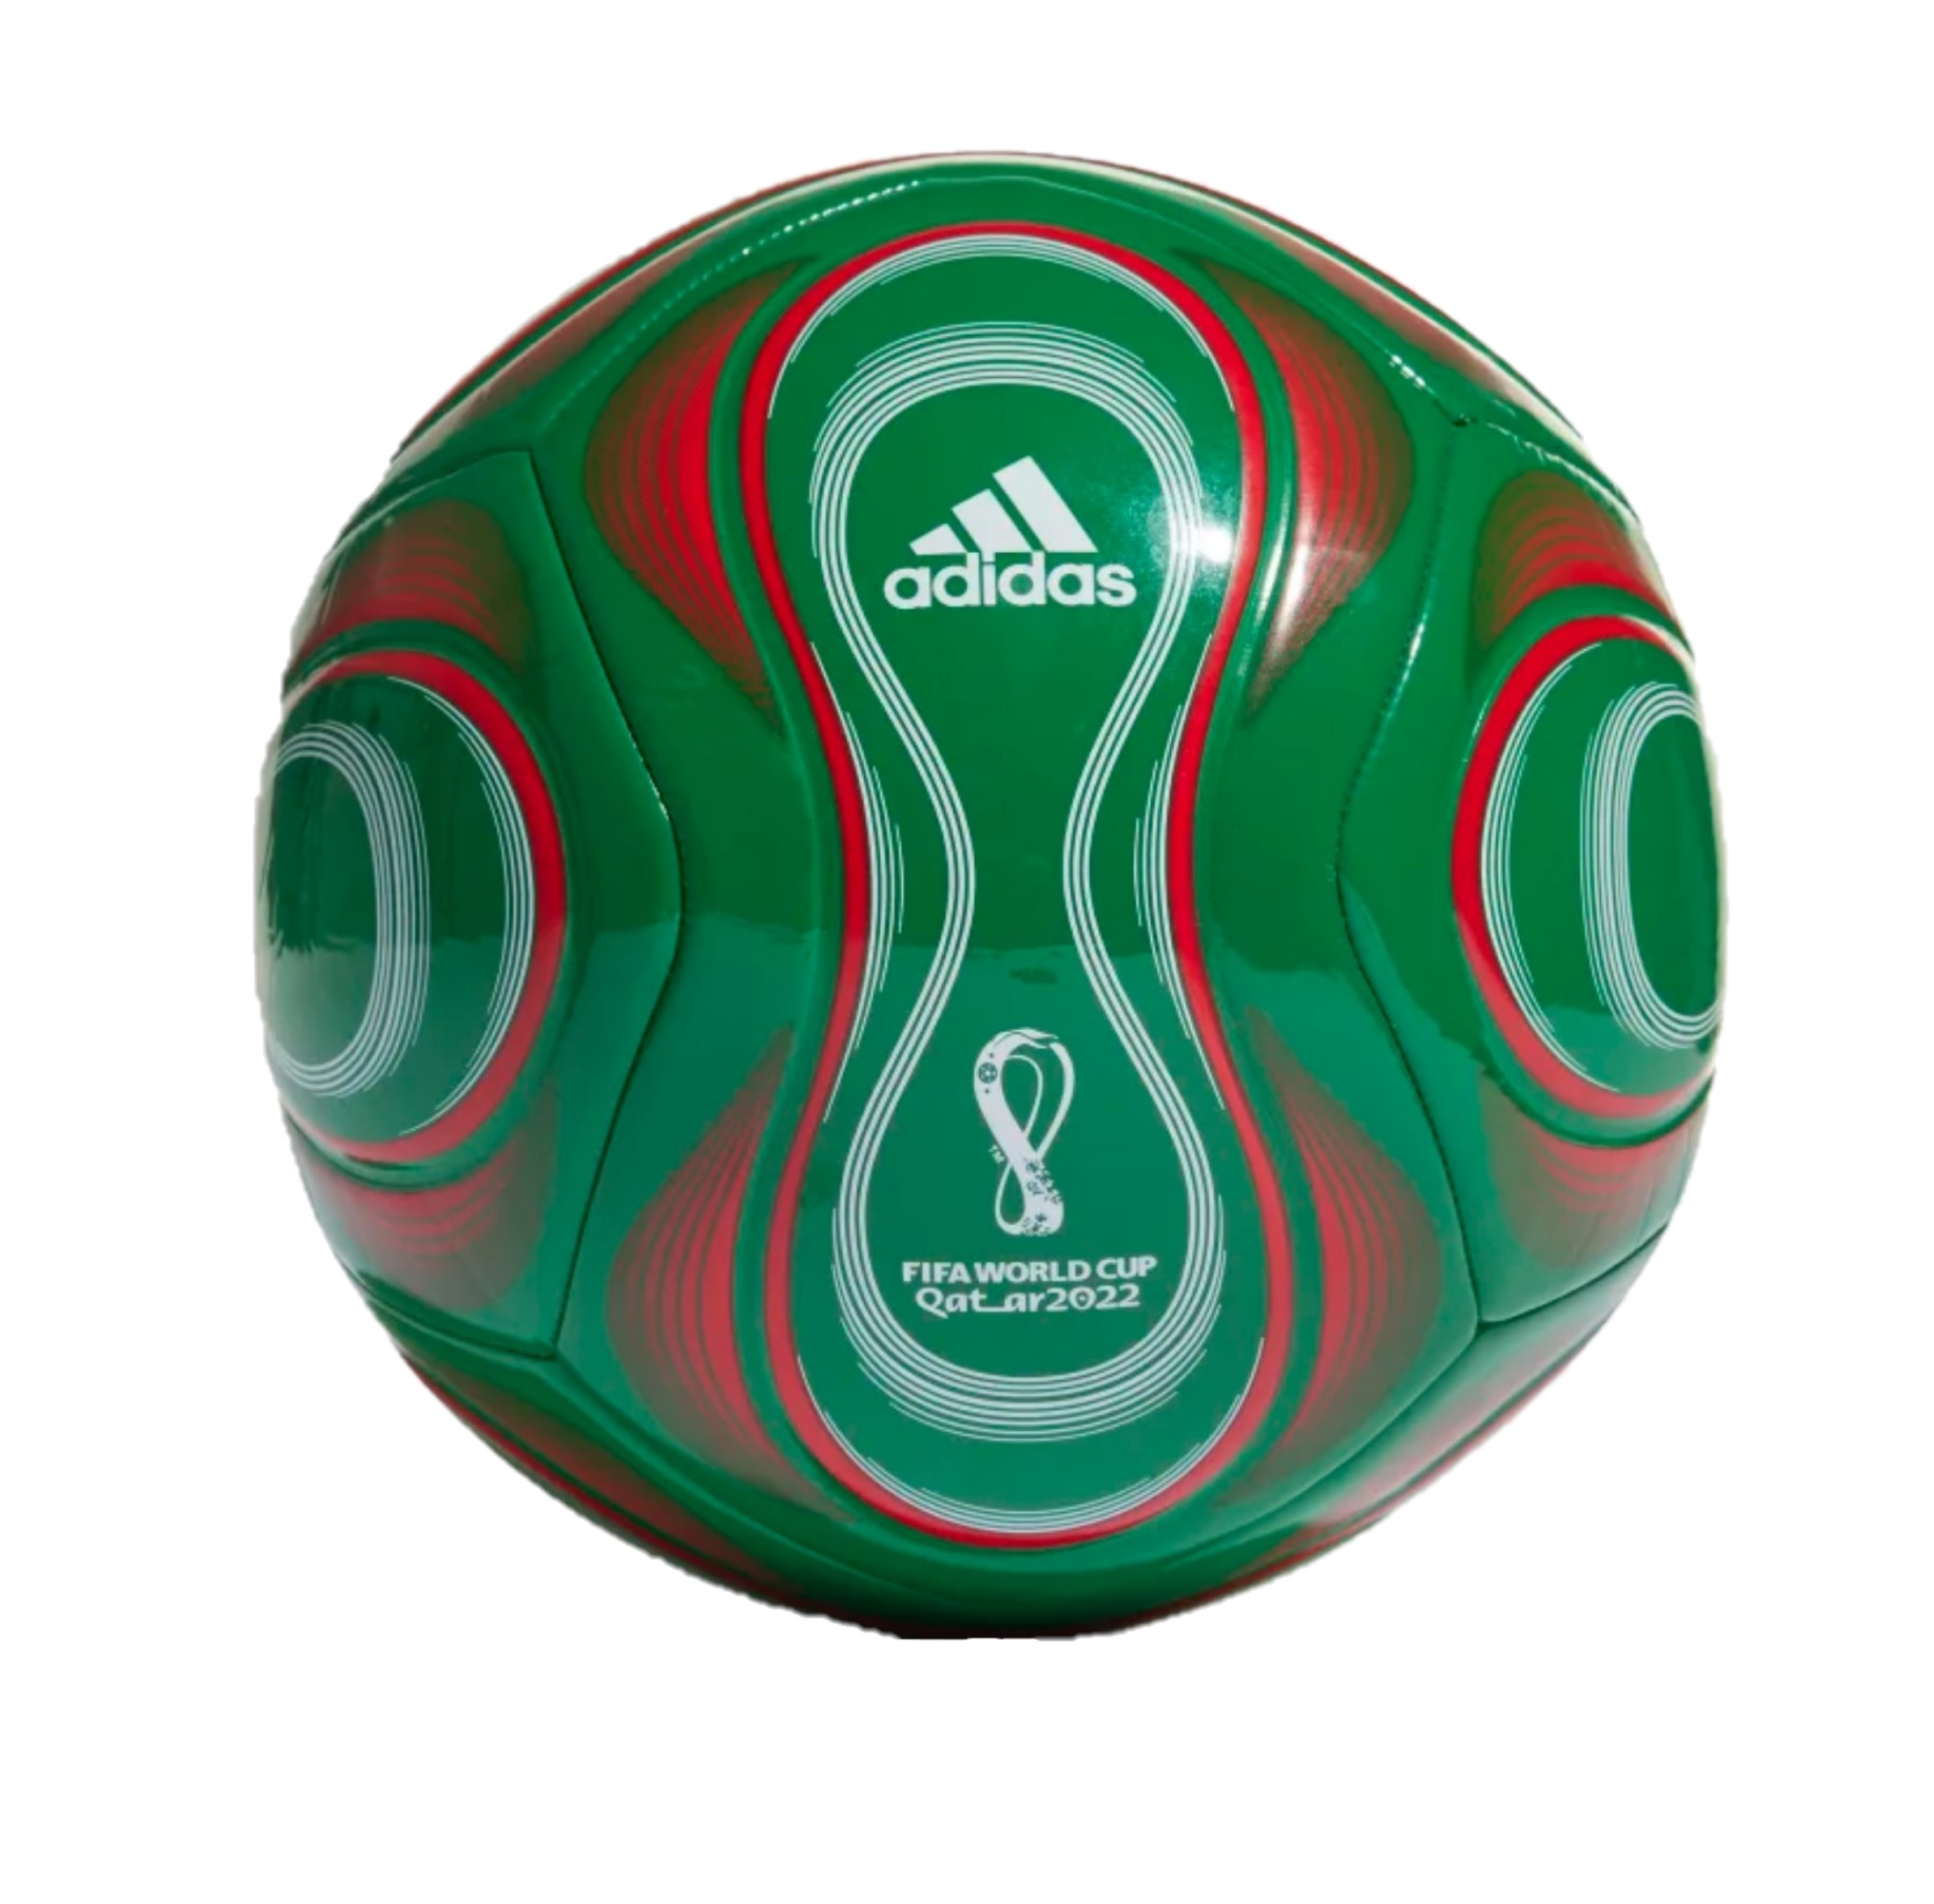 Adidas Mexico Club Soccer Ball-Size 5 - image 1 of 3